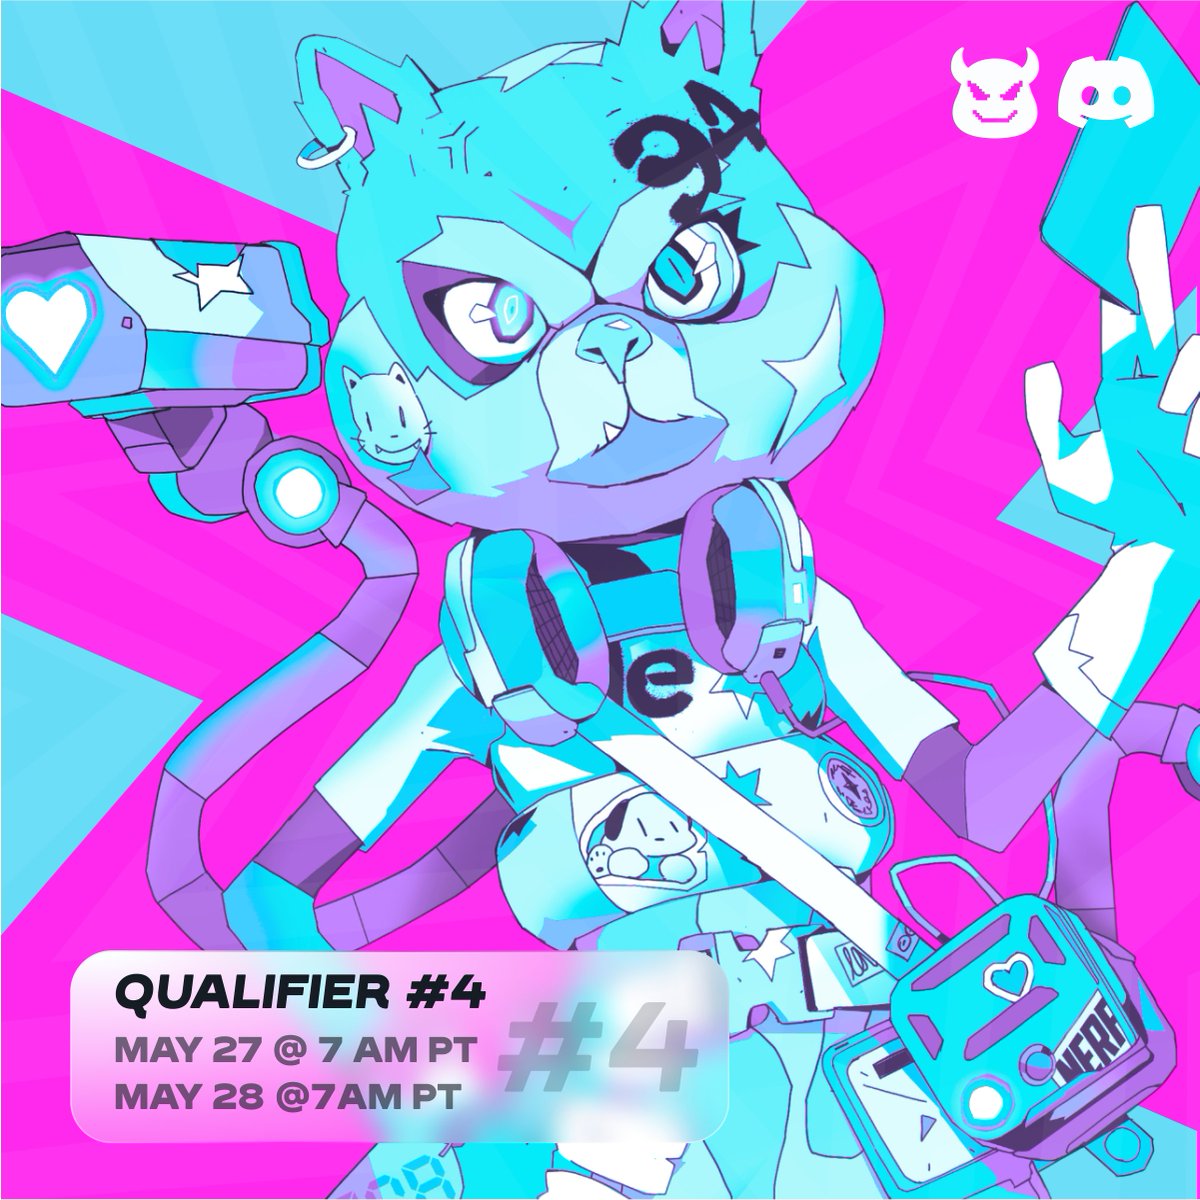 Our 4th Qualifier Tourny starts in 30 mins! 🤜💥🤛

💵 $375 USDC, 3 MixBot Capsules & 50,000 SUD$ up for grabs 🤑

🪙 Non-Mask holders win SUD$! Champion claims the Glitch Pixel ✨🏆✨

🍿 Watch & Bet open

Head to Discord for details - link in bio! 🔗👆 #MixMobRacer1